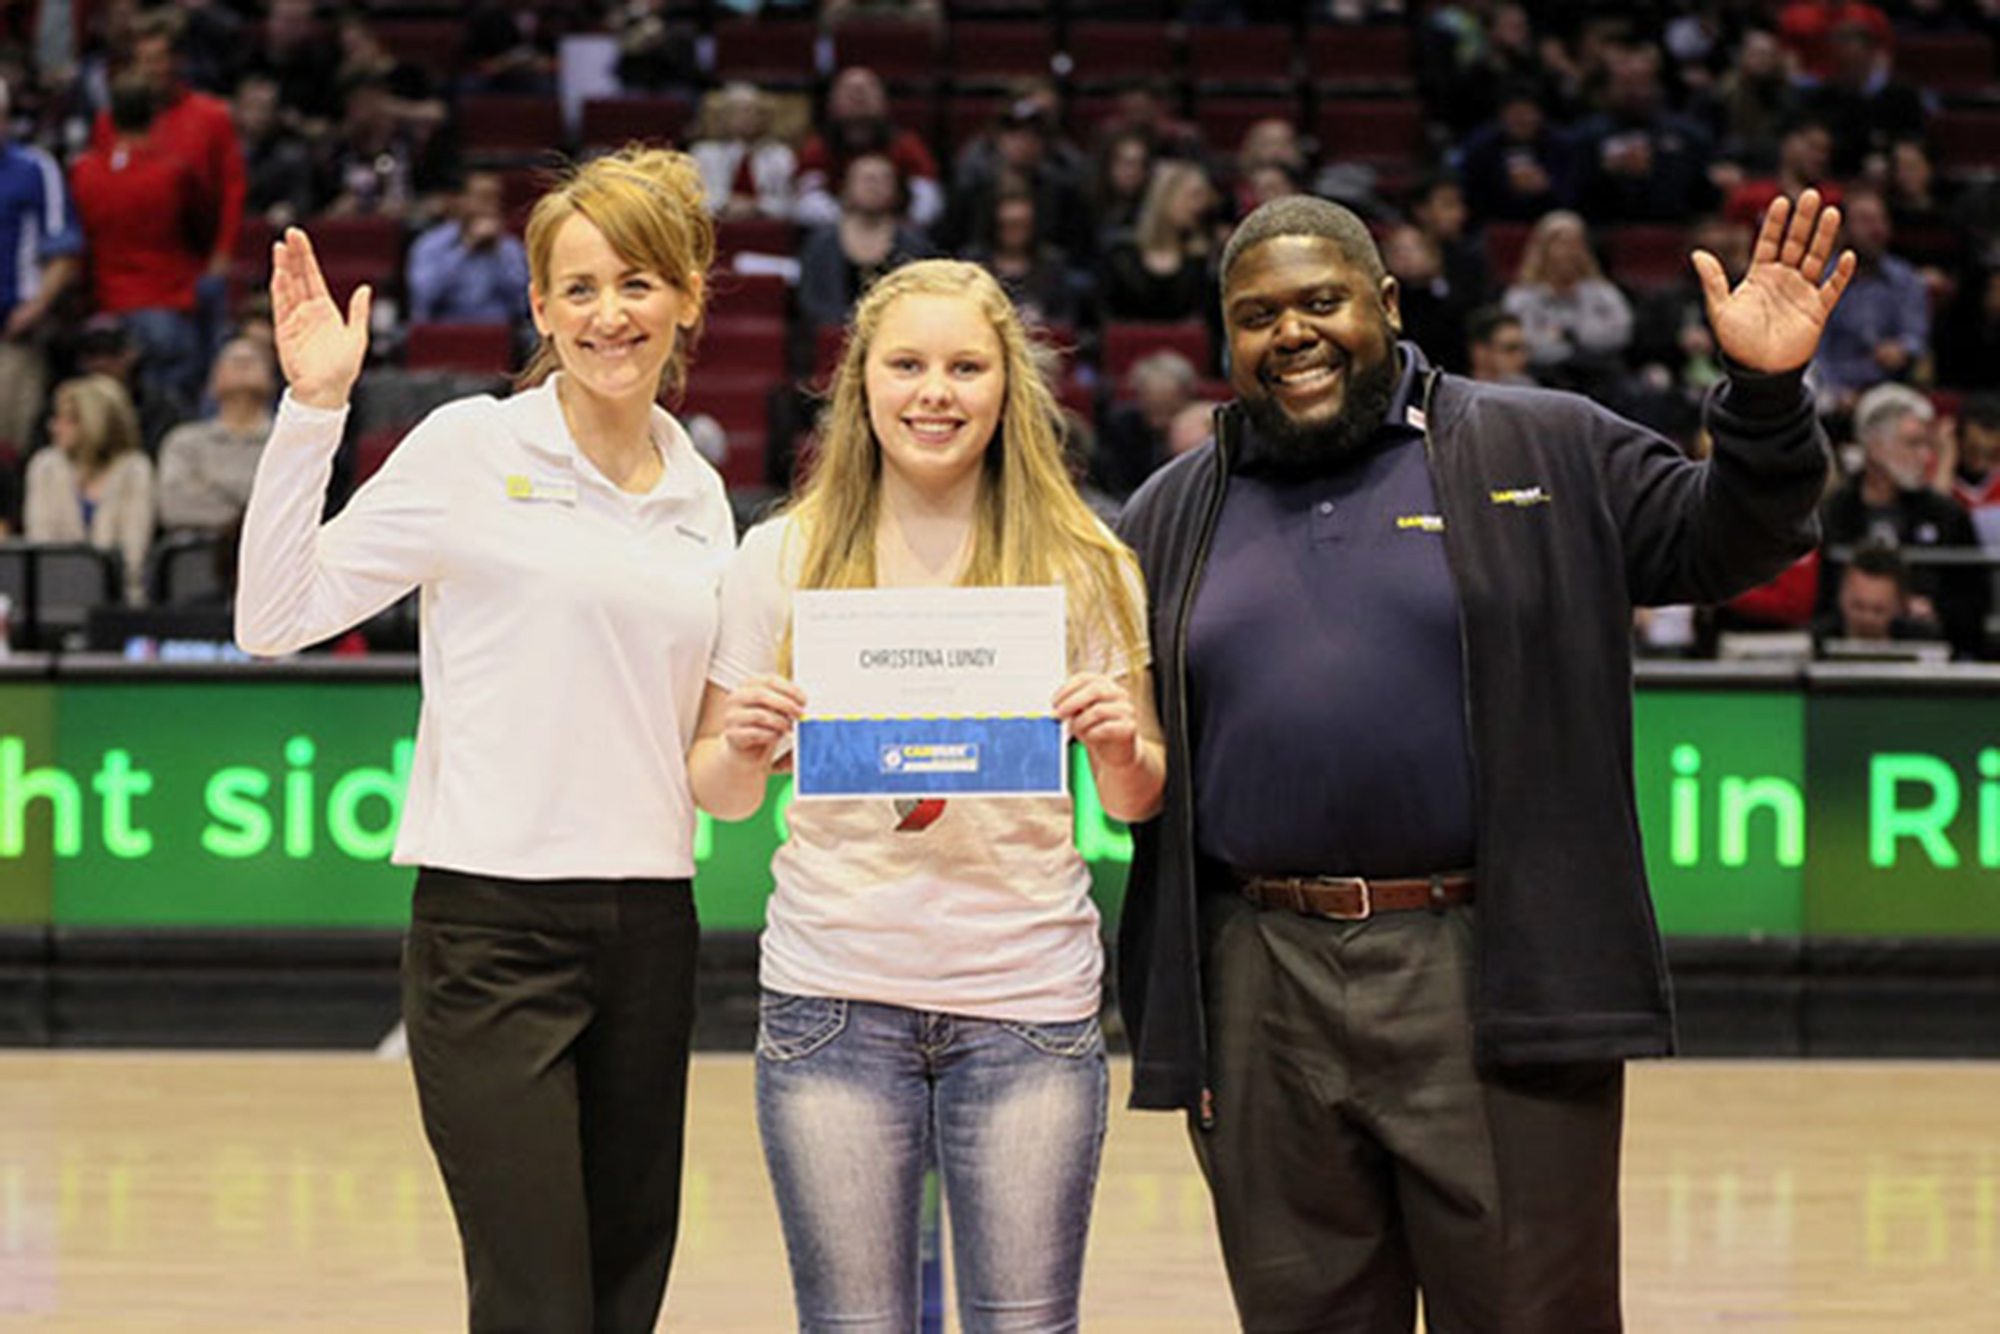 Mountain View: Christina Lundy, center, pictured with two CarMax employees, was honored at a recent Blazers game after being named a CarMax Teen Captain.